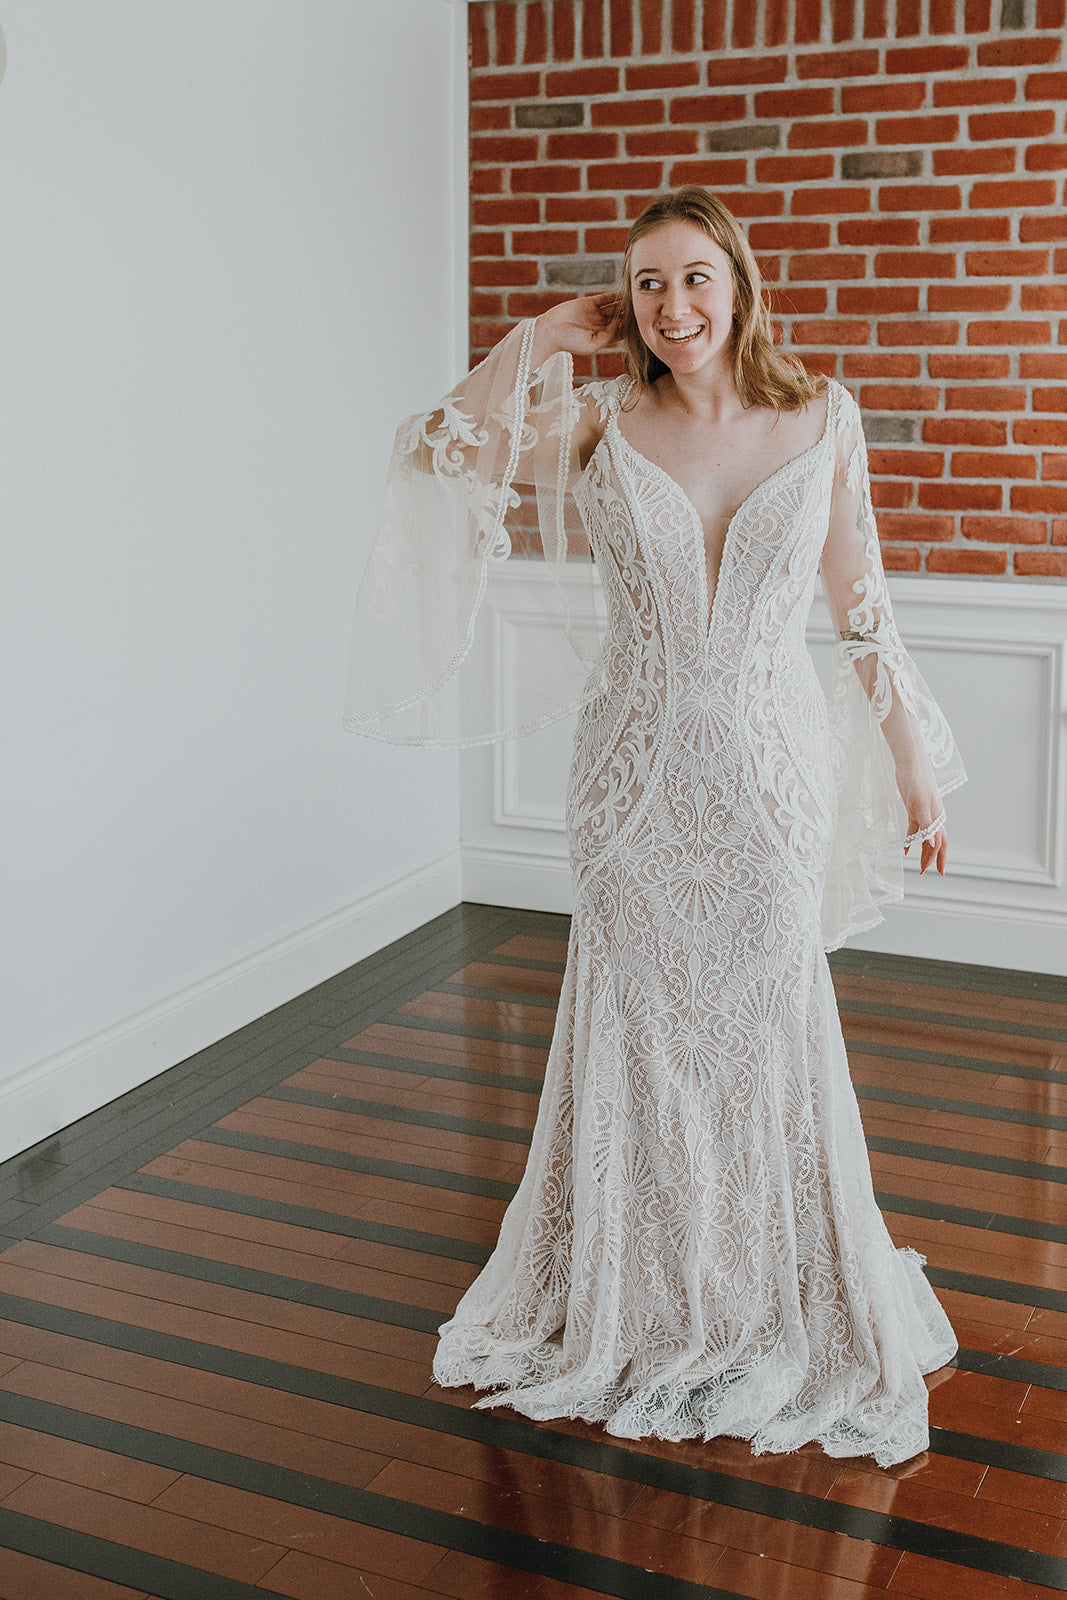 Wilson *sample size 8 - fitted lace boho wedding dress with lightweight tulle bell sleeves and open back